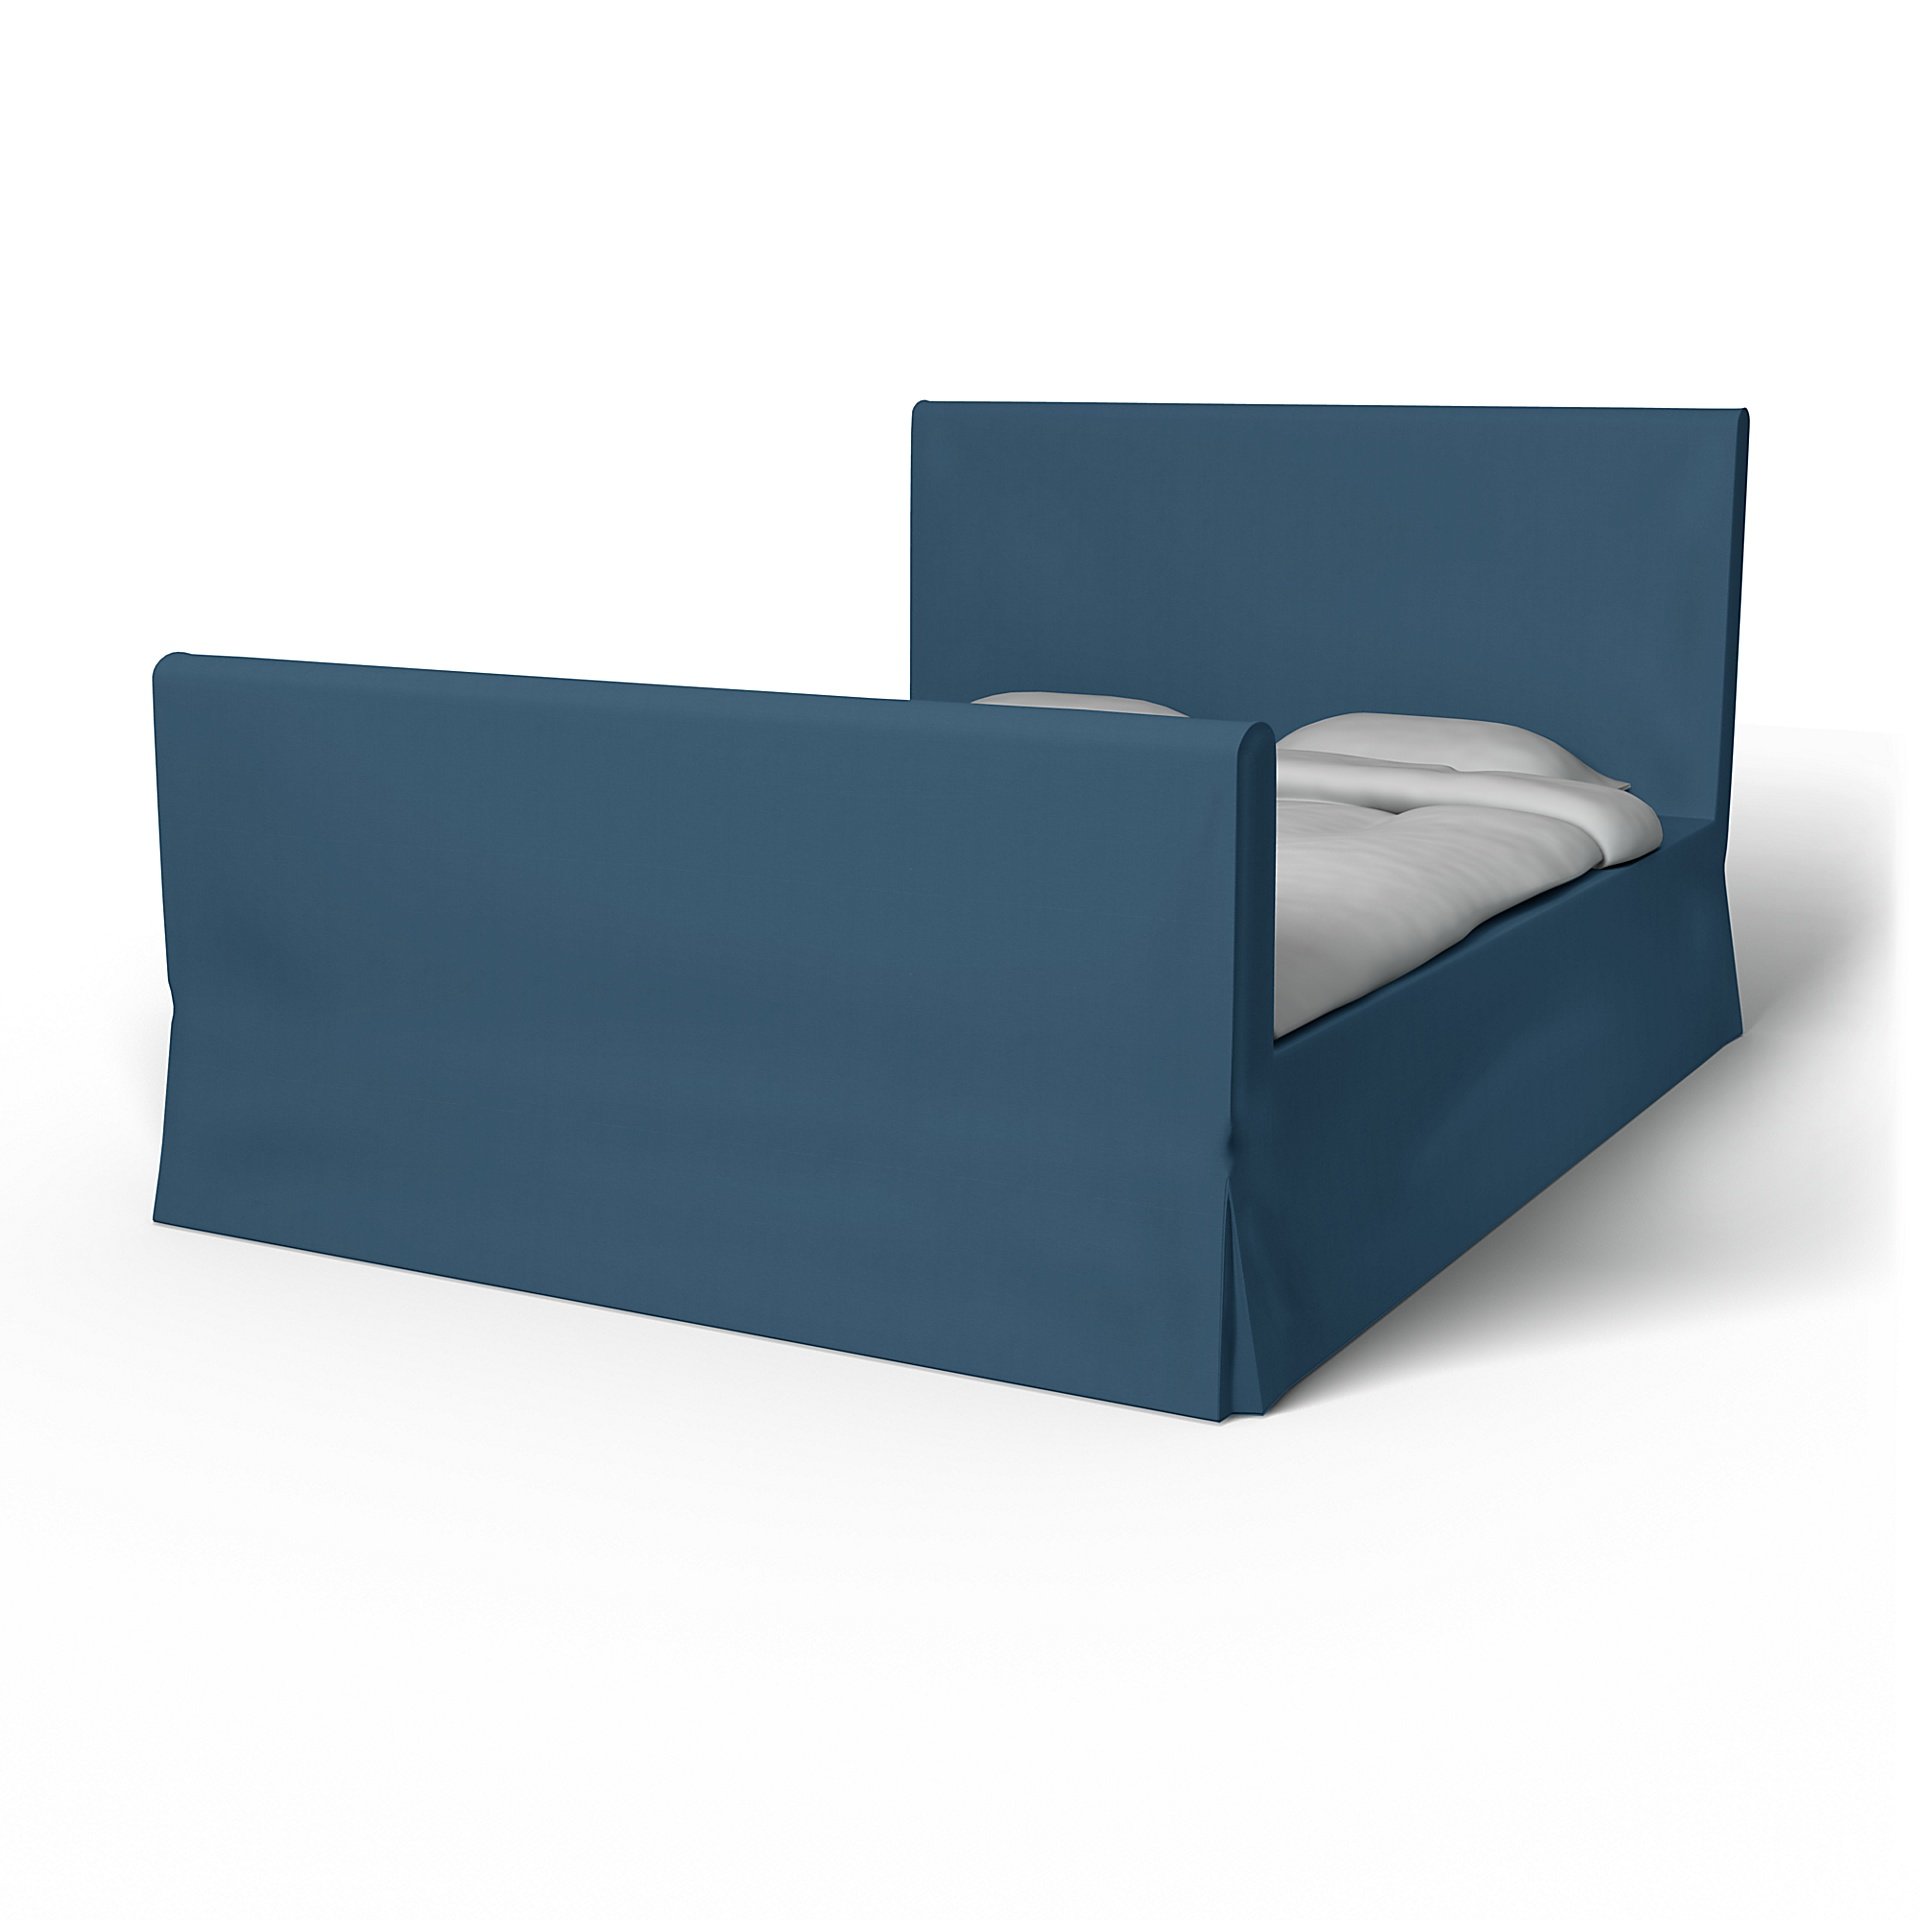 IKEA - Floro Bed Frame Cover, Real Teal, Cotton - Bemz